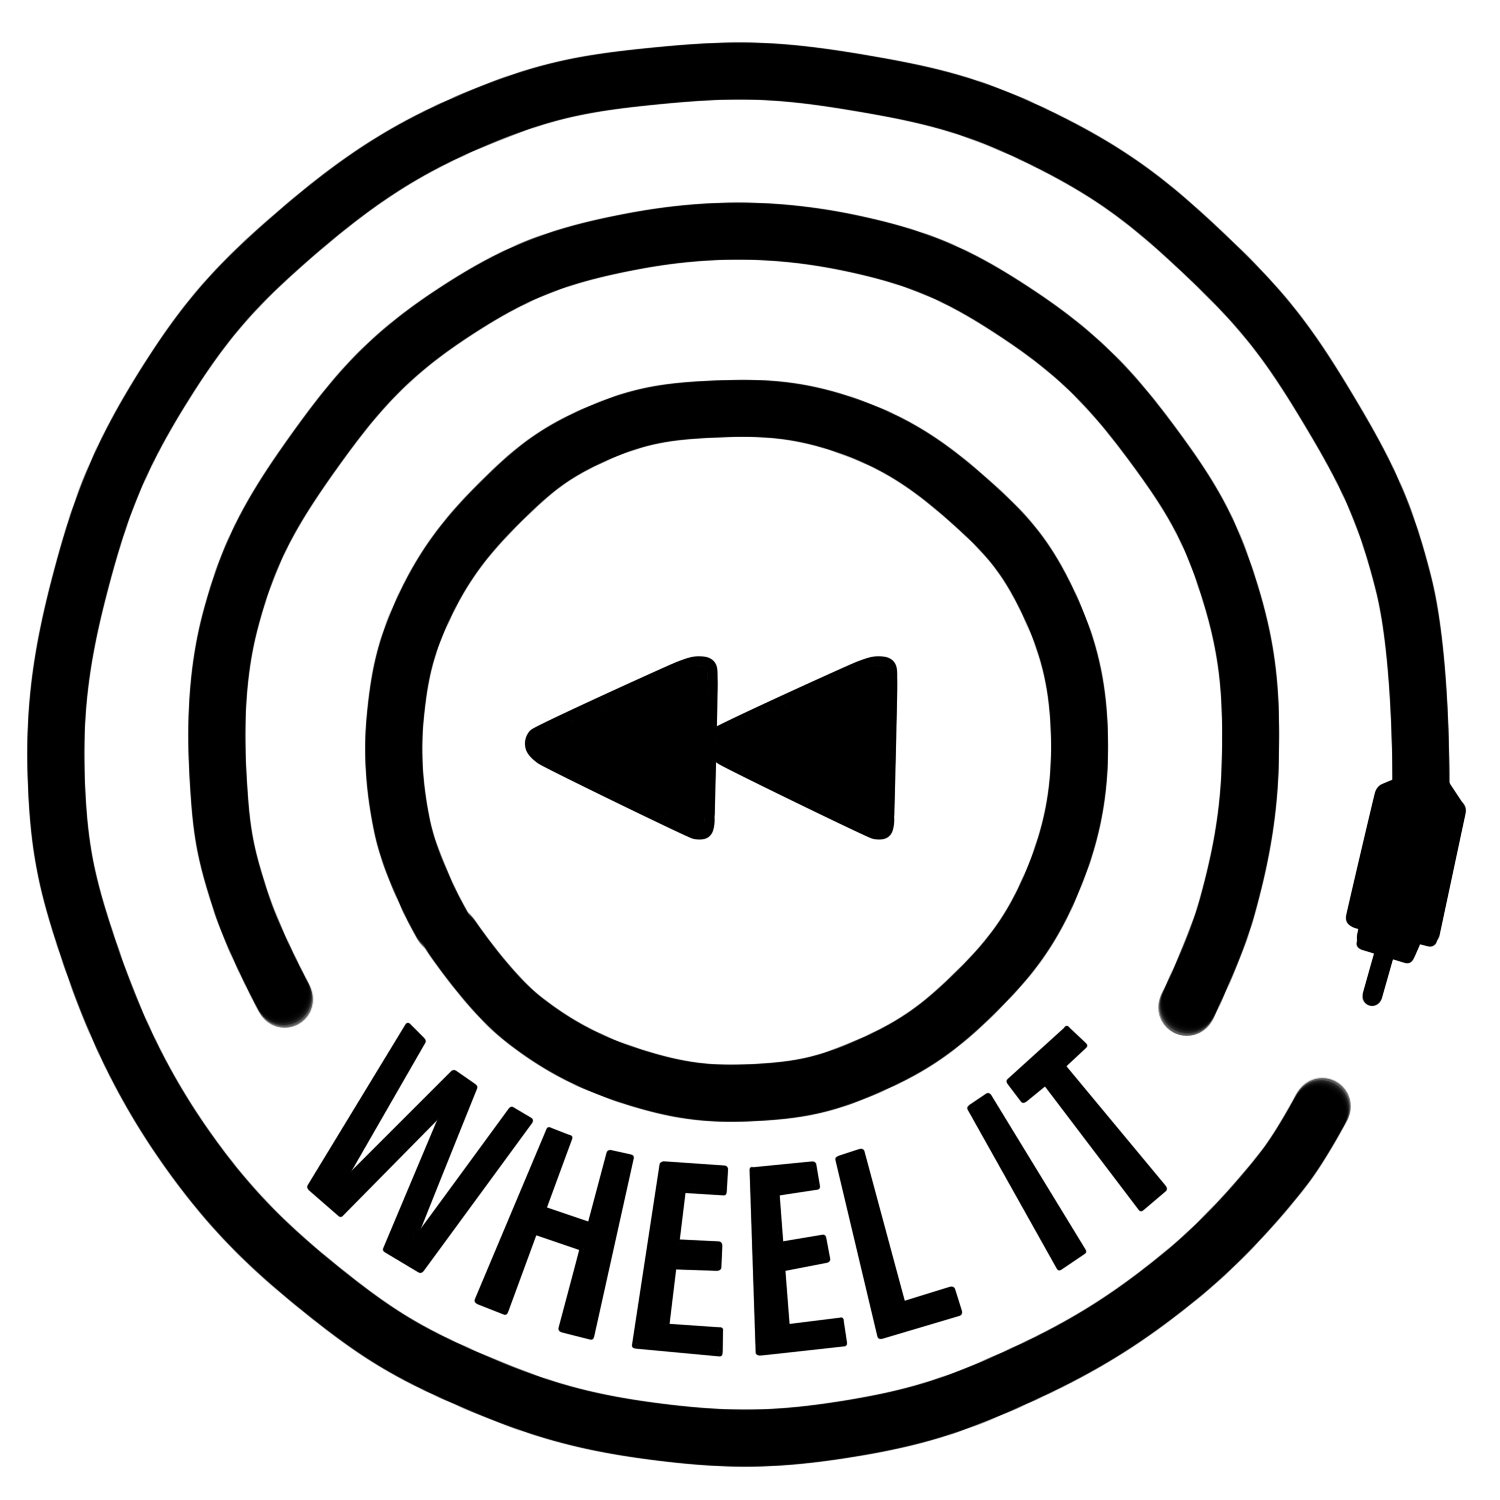 The podcast documenting music shaping the culture. For the love of timeless music. 🖤 // Hosts: @LamiAkindele @cozy_carl // wheelitpodcast@gmail.com #wheelitpod